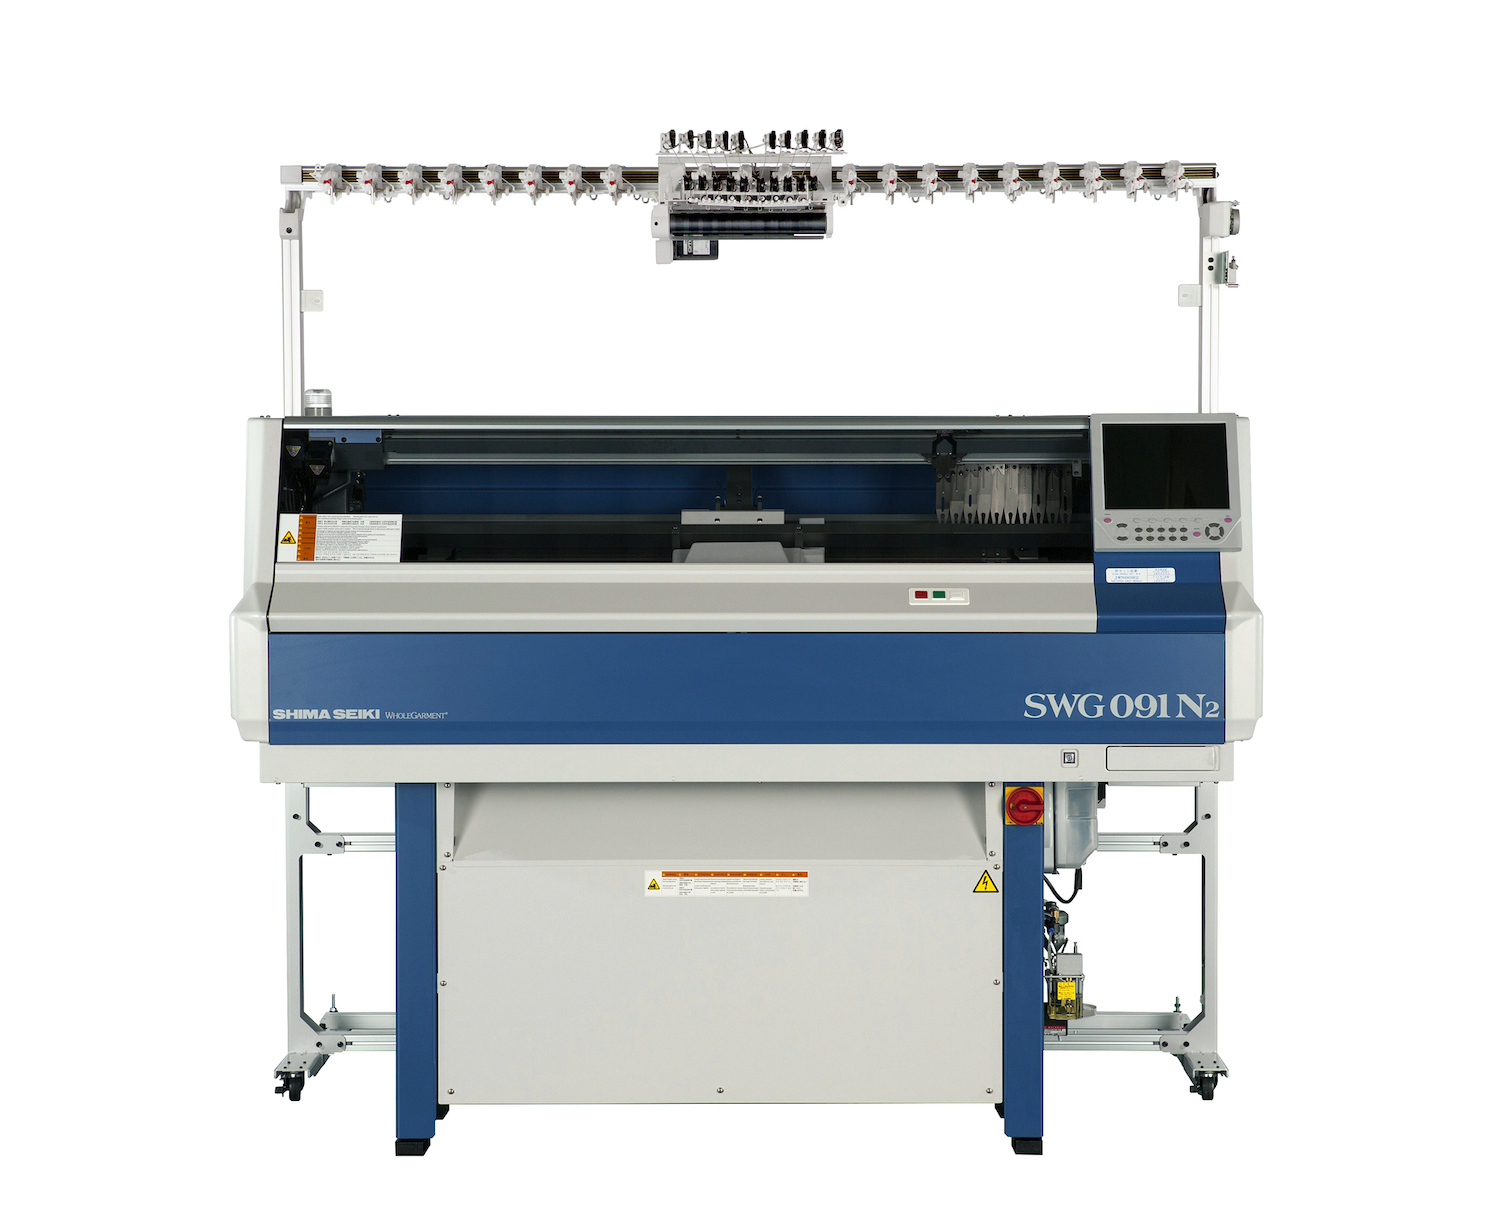 Also shown will be the SWG091N2 compact WHOLEGARMENT knitting machine. © Shima Seiki